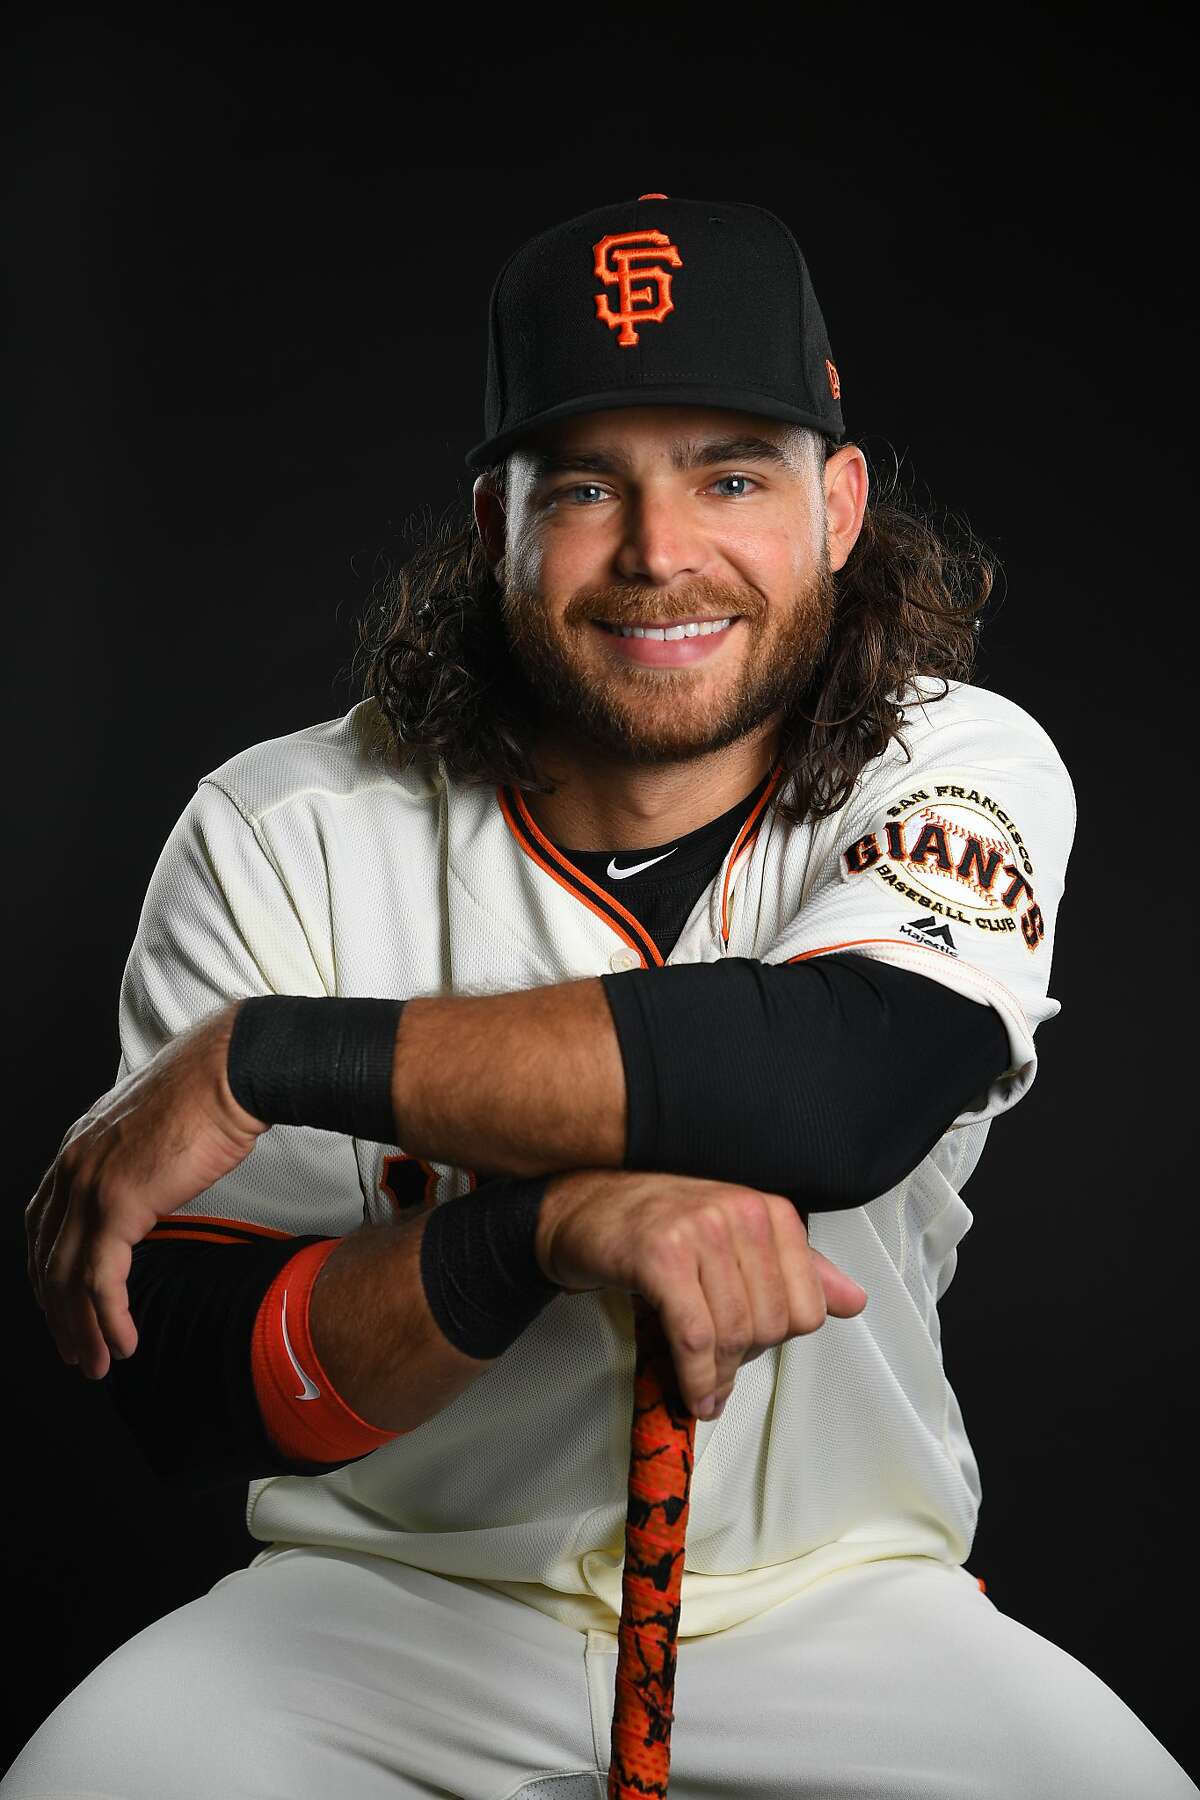 Brandon Crawford poses during the Giants Photo Day on February 21, 2019 in Scottsdale, Arizona.